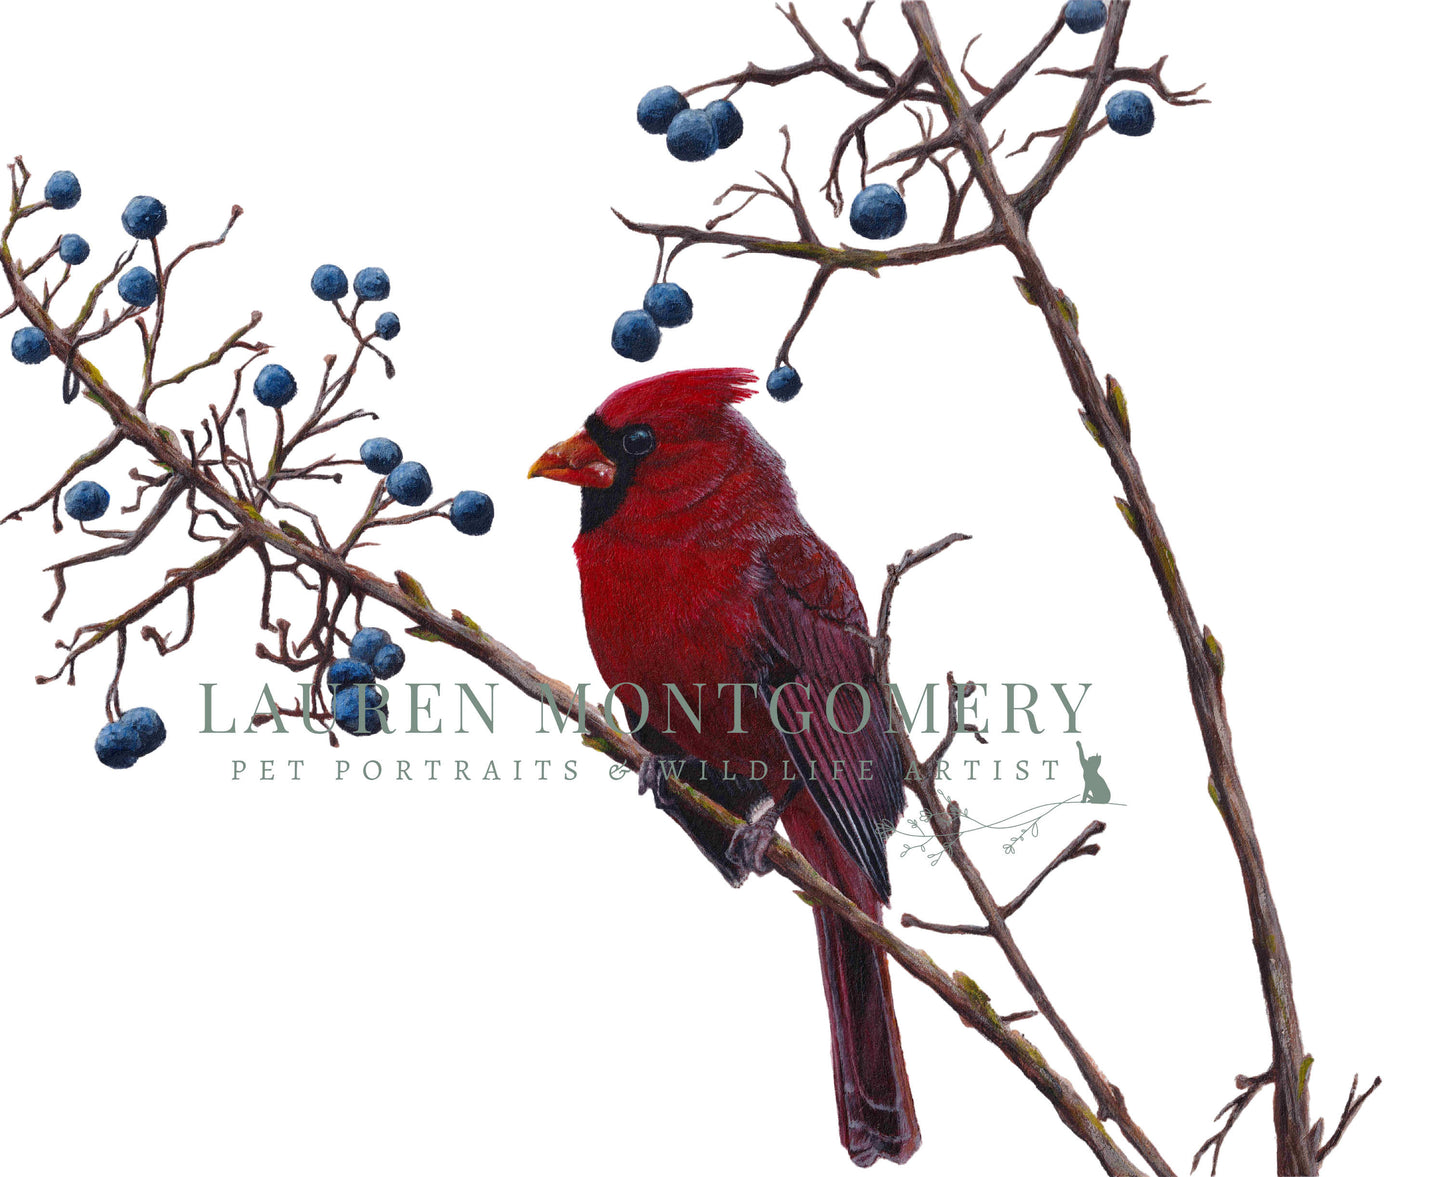 Giclée Fine Art Print - ‘Cardinal Rule’ MIX & MATCH 2 FOR $50 (8x10") AND 2 FOR $90 (11x14")